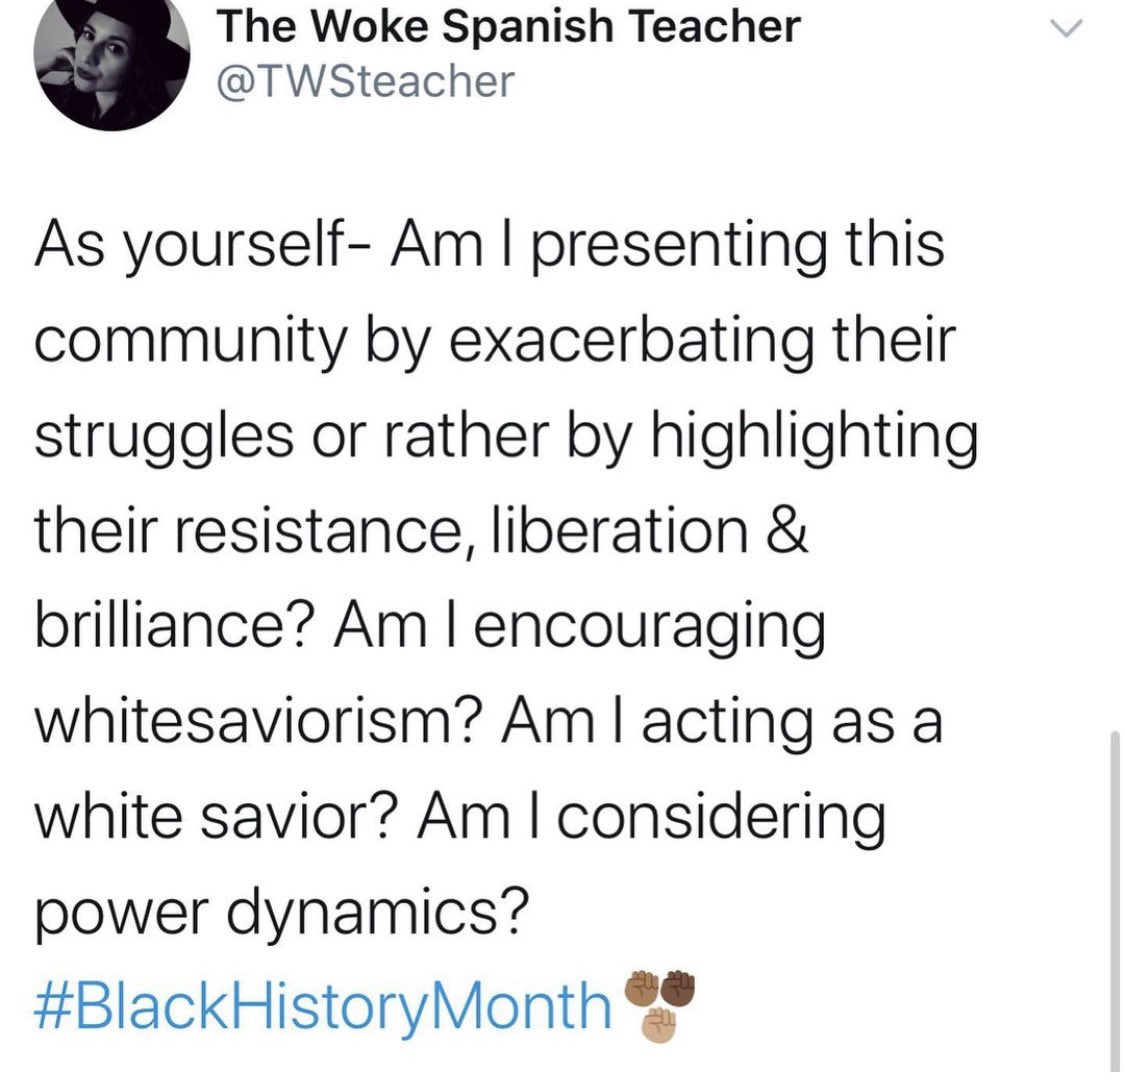 It exalts the accomplishments and heroicity of yt men and it has been peppered with months dedicated to other communities for the sake of shallow multiculturality. Tokenism at its best  #langchat  #BlackHistoryMonth  